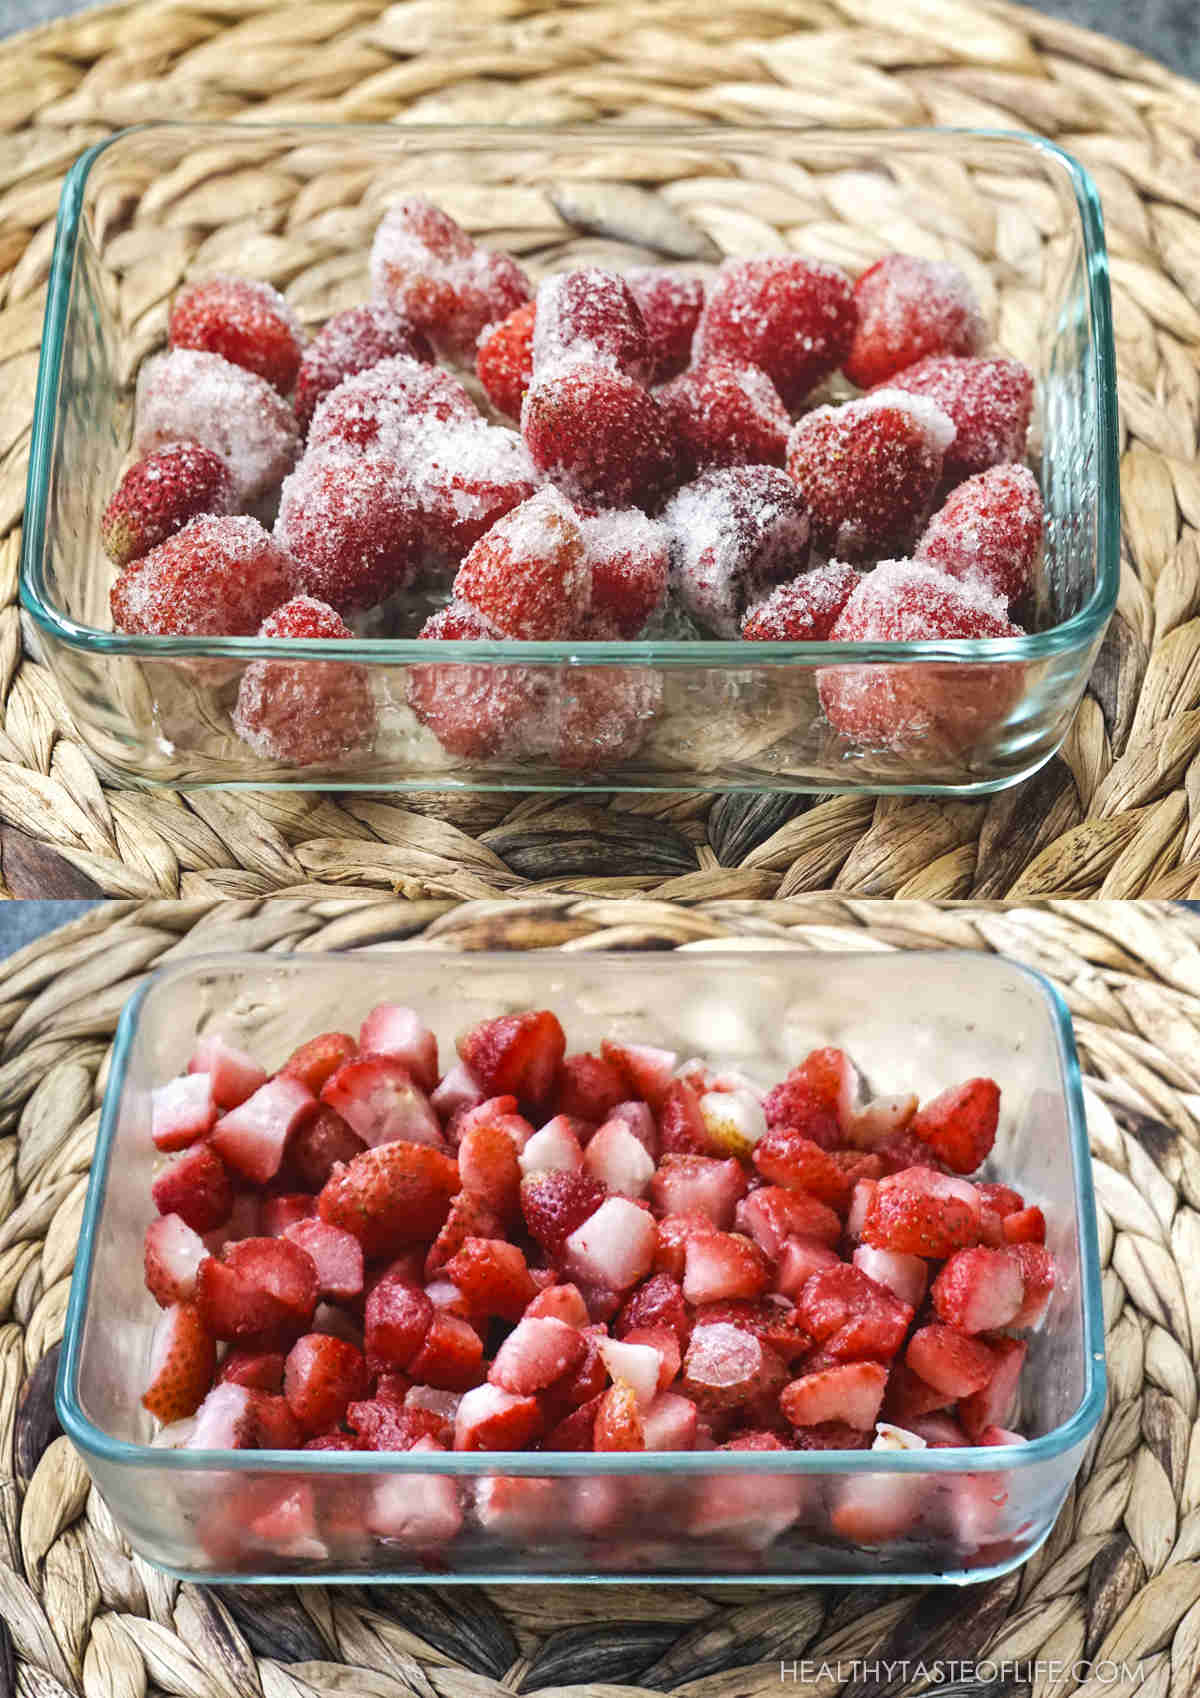 Frozen strawberries diced into smaller chunks.